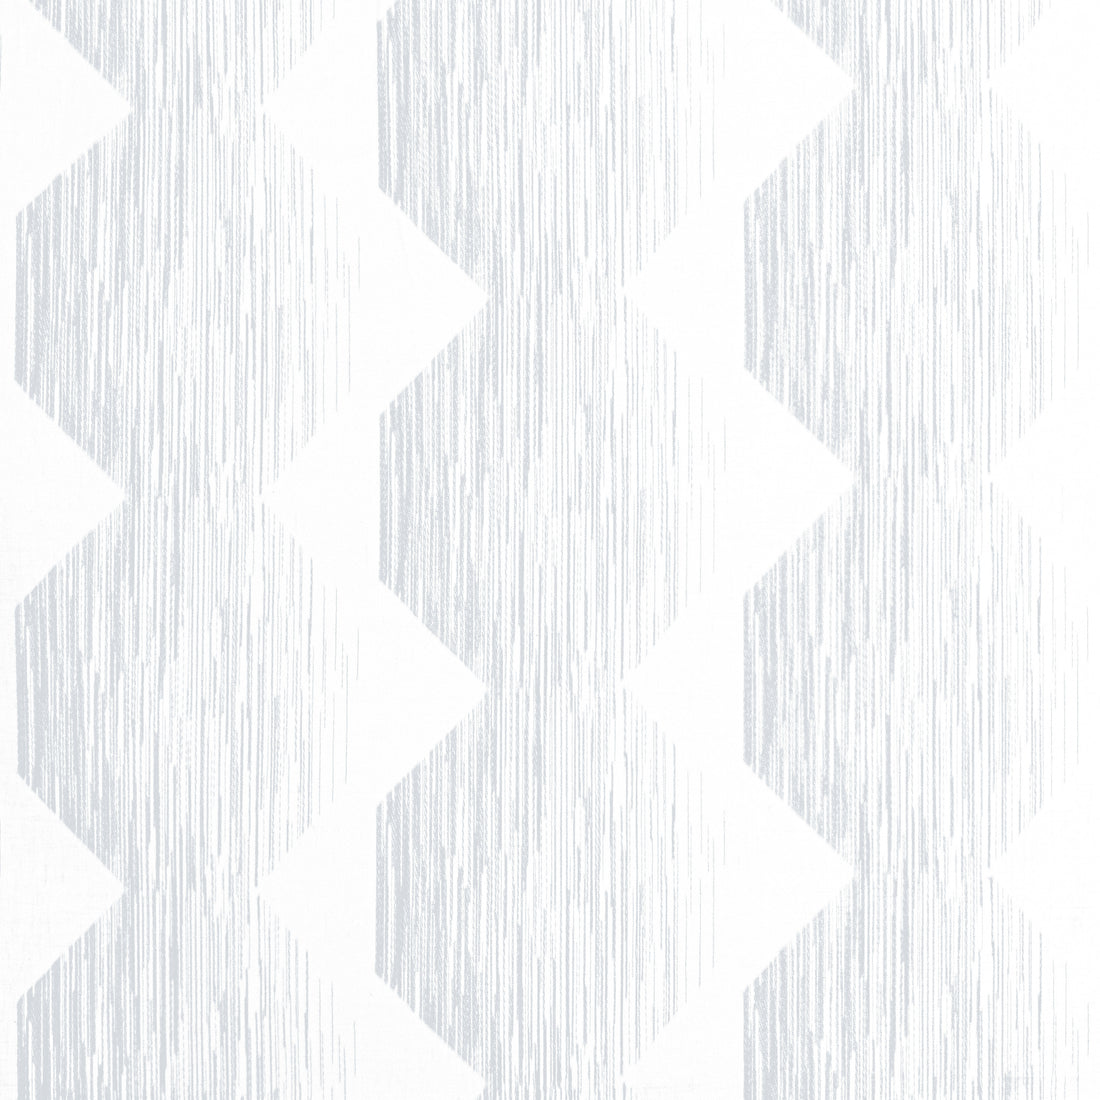 Enzo fabric in platinum color - pattern number FWW8273 - by Thibaut in the Aura collection